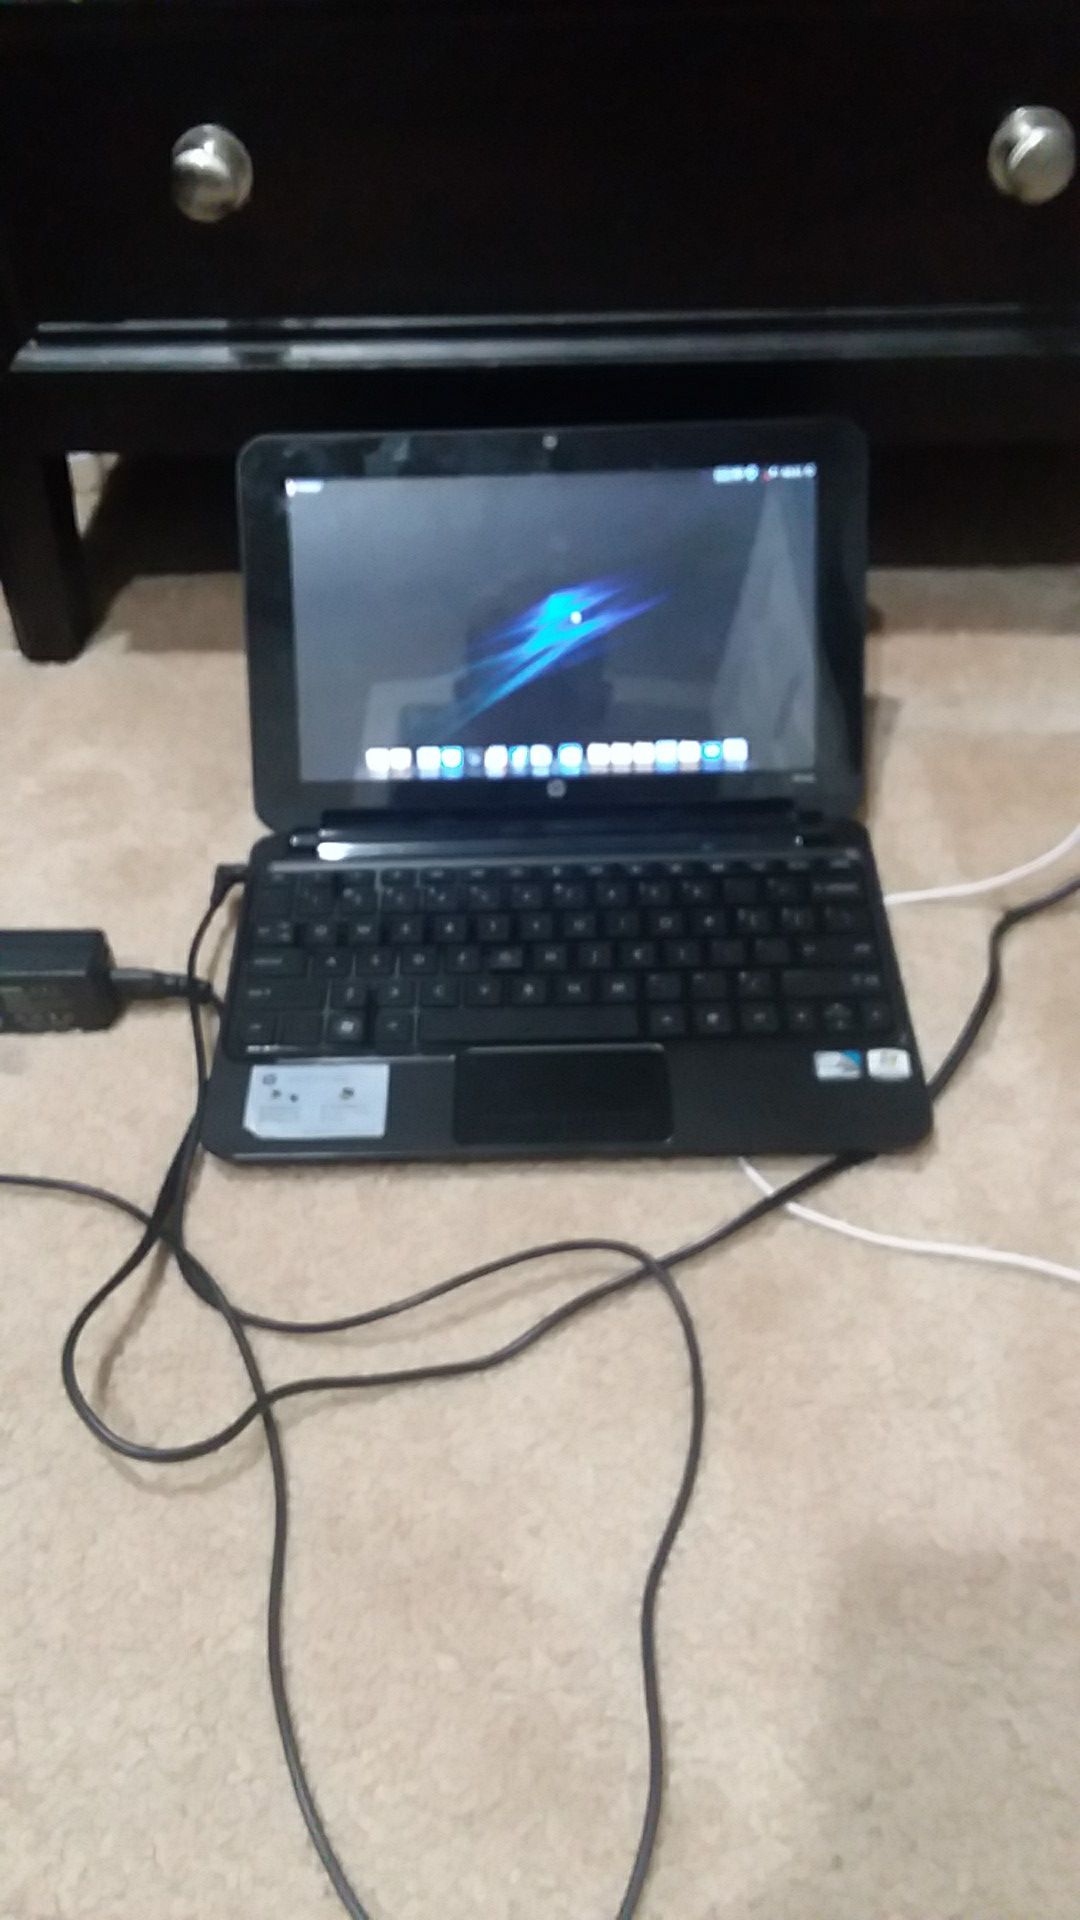 HP mini laptop with peppermint linux